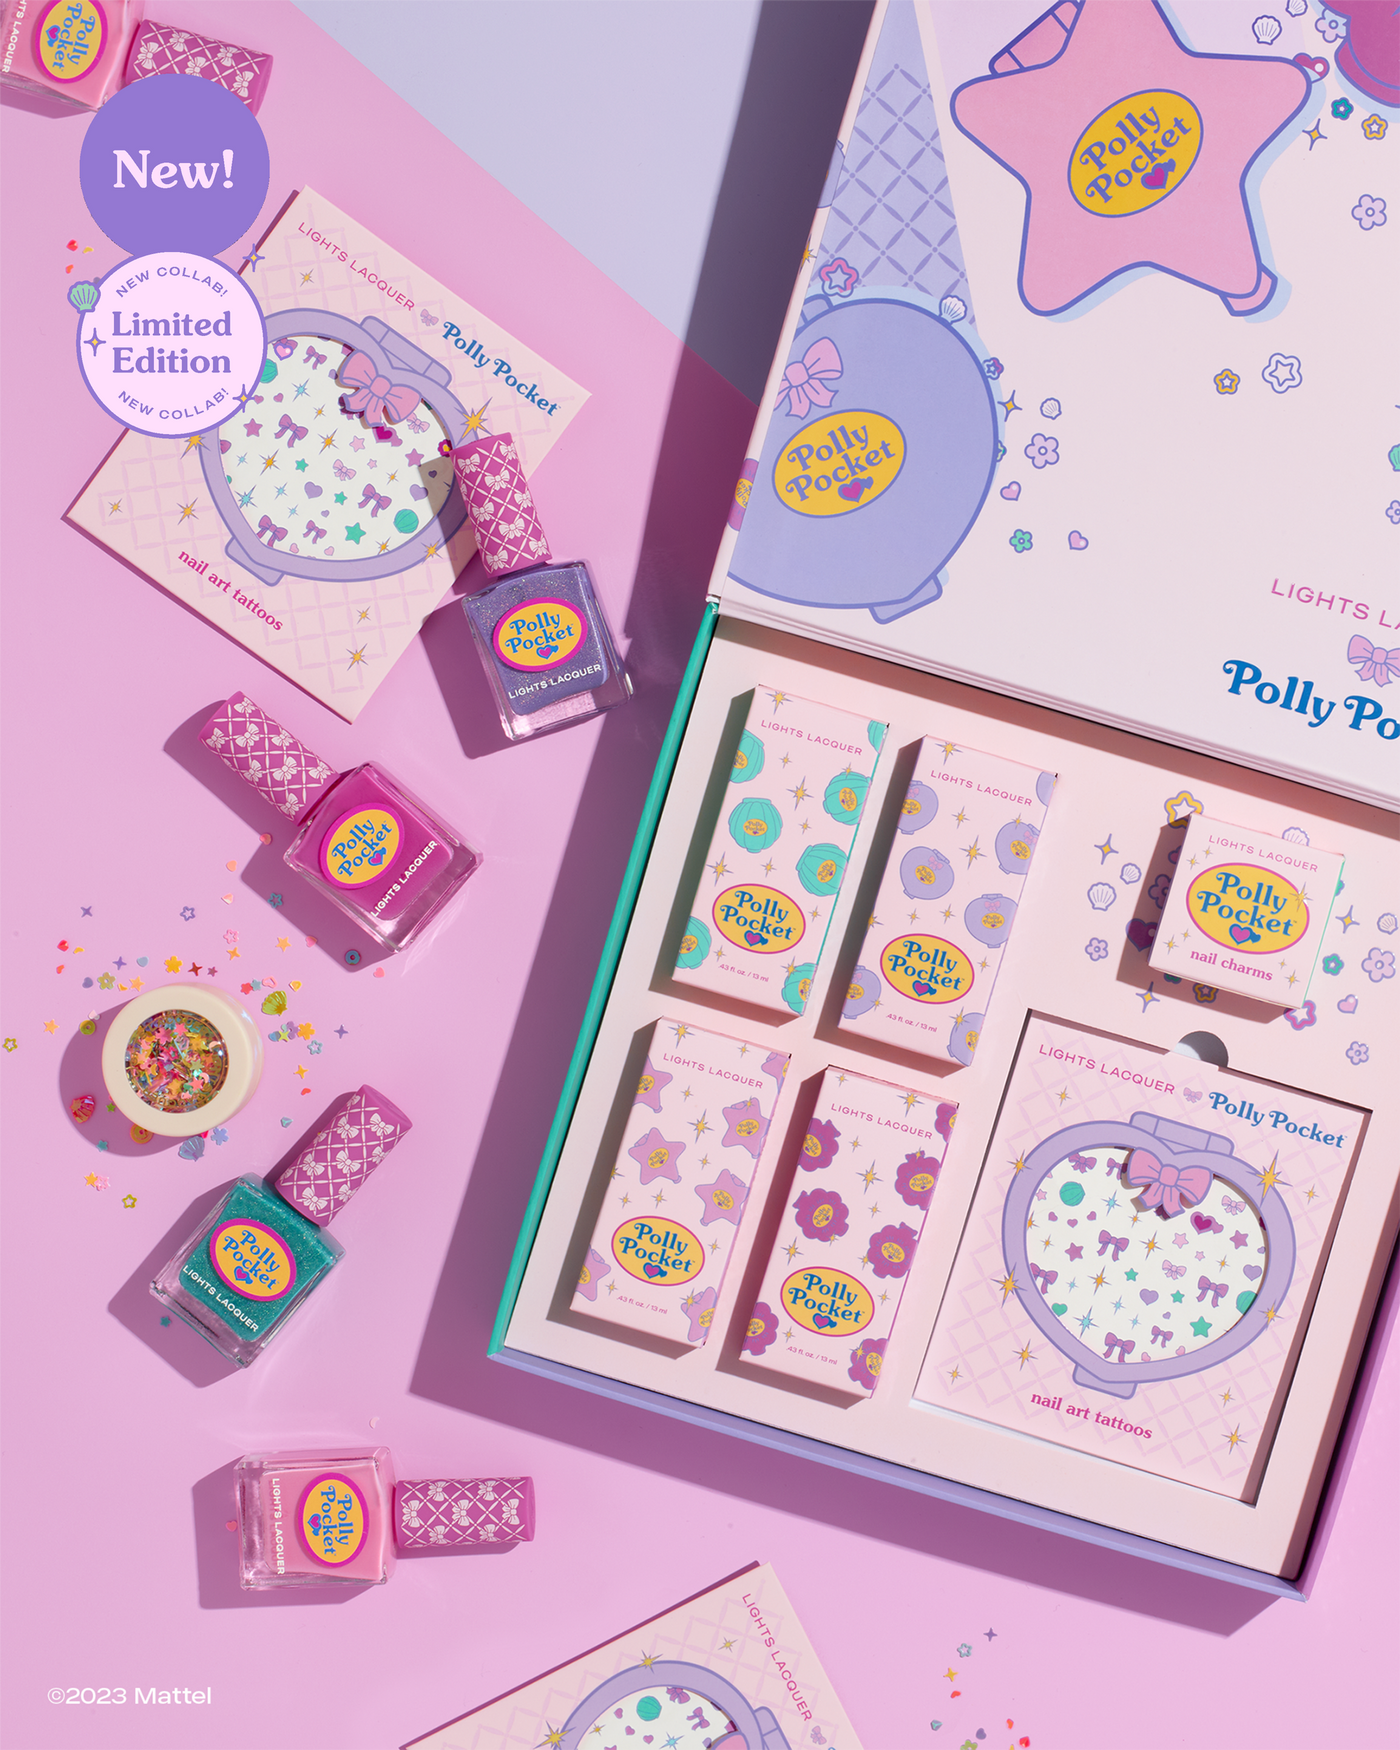 Polly Pocket™ x Lights Lacquer Collector’s Edition